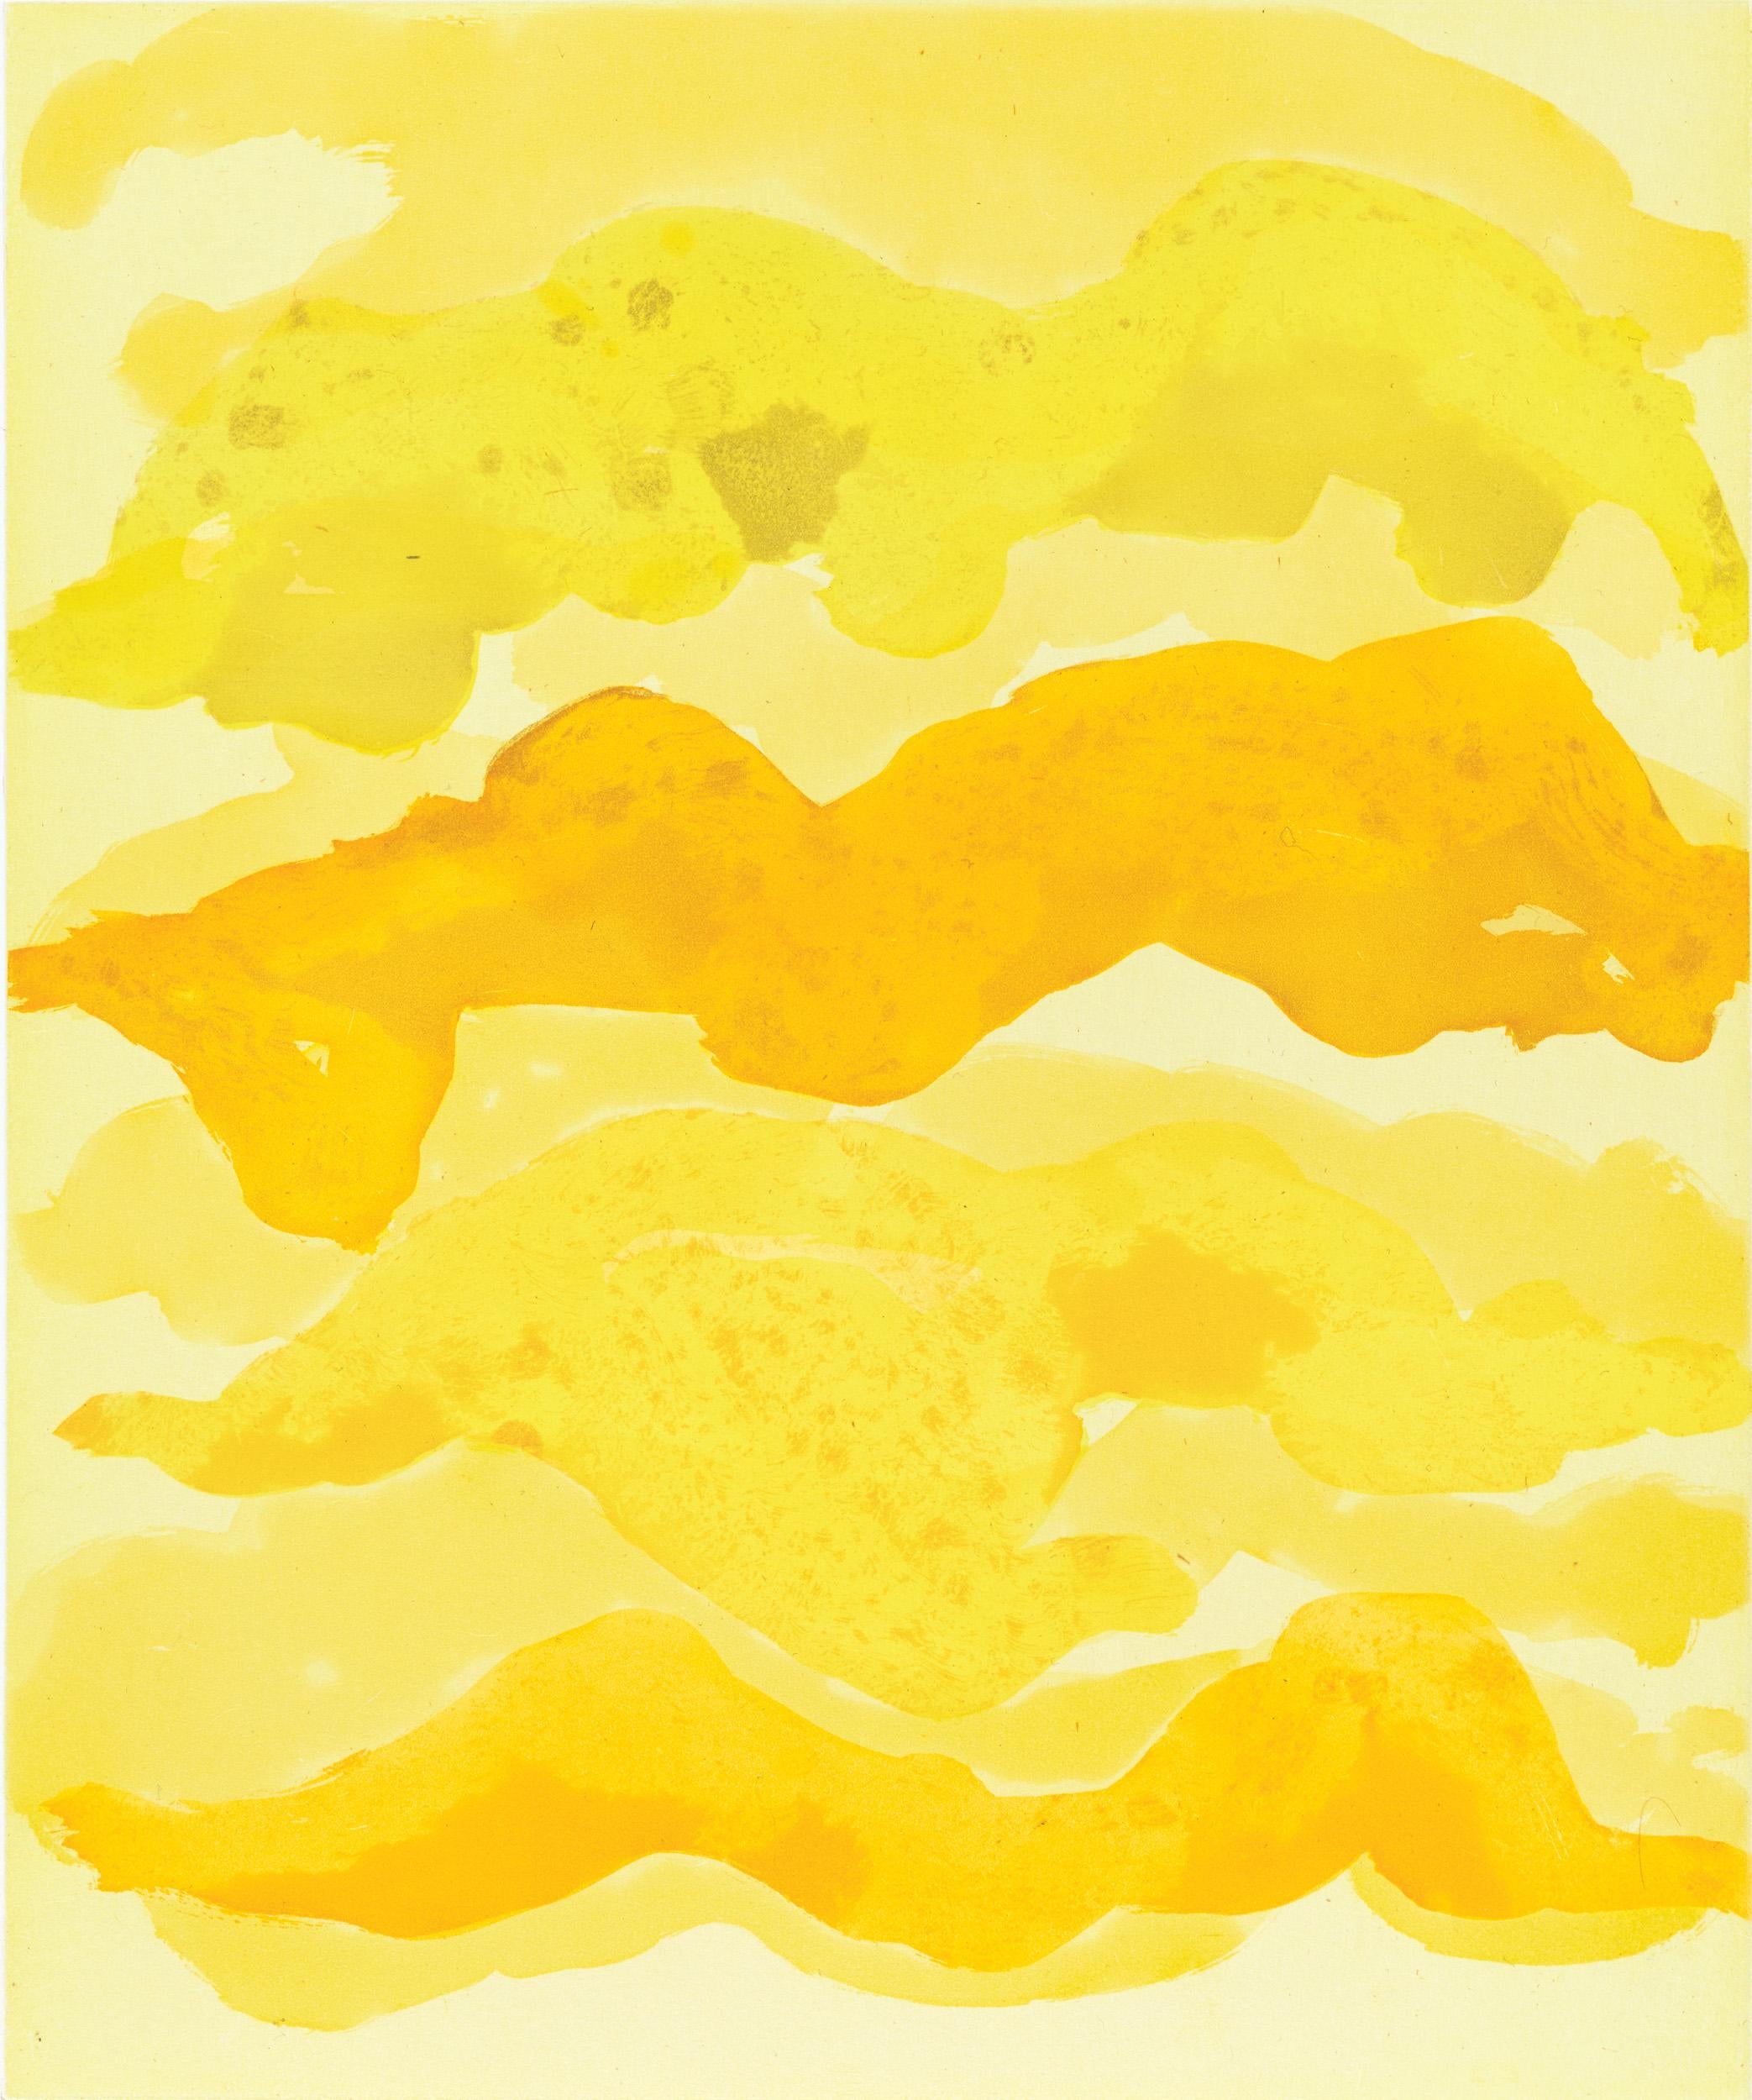 Mary Heilmann Abstract Print - Yellow Lineup